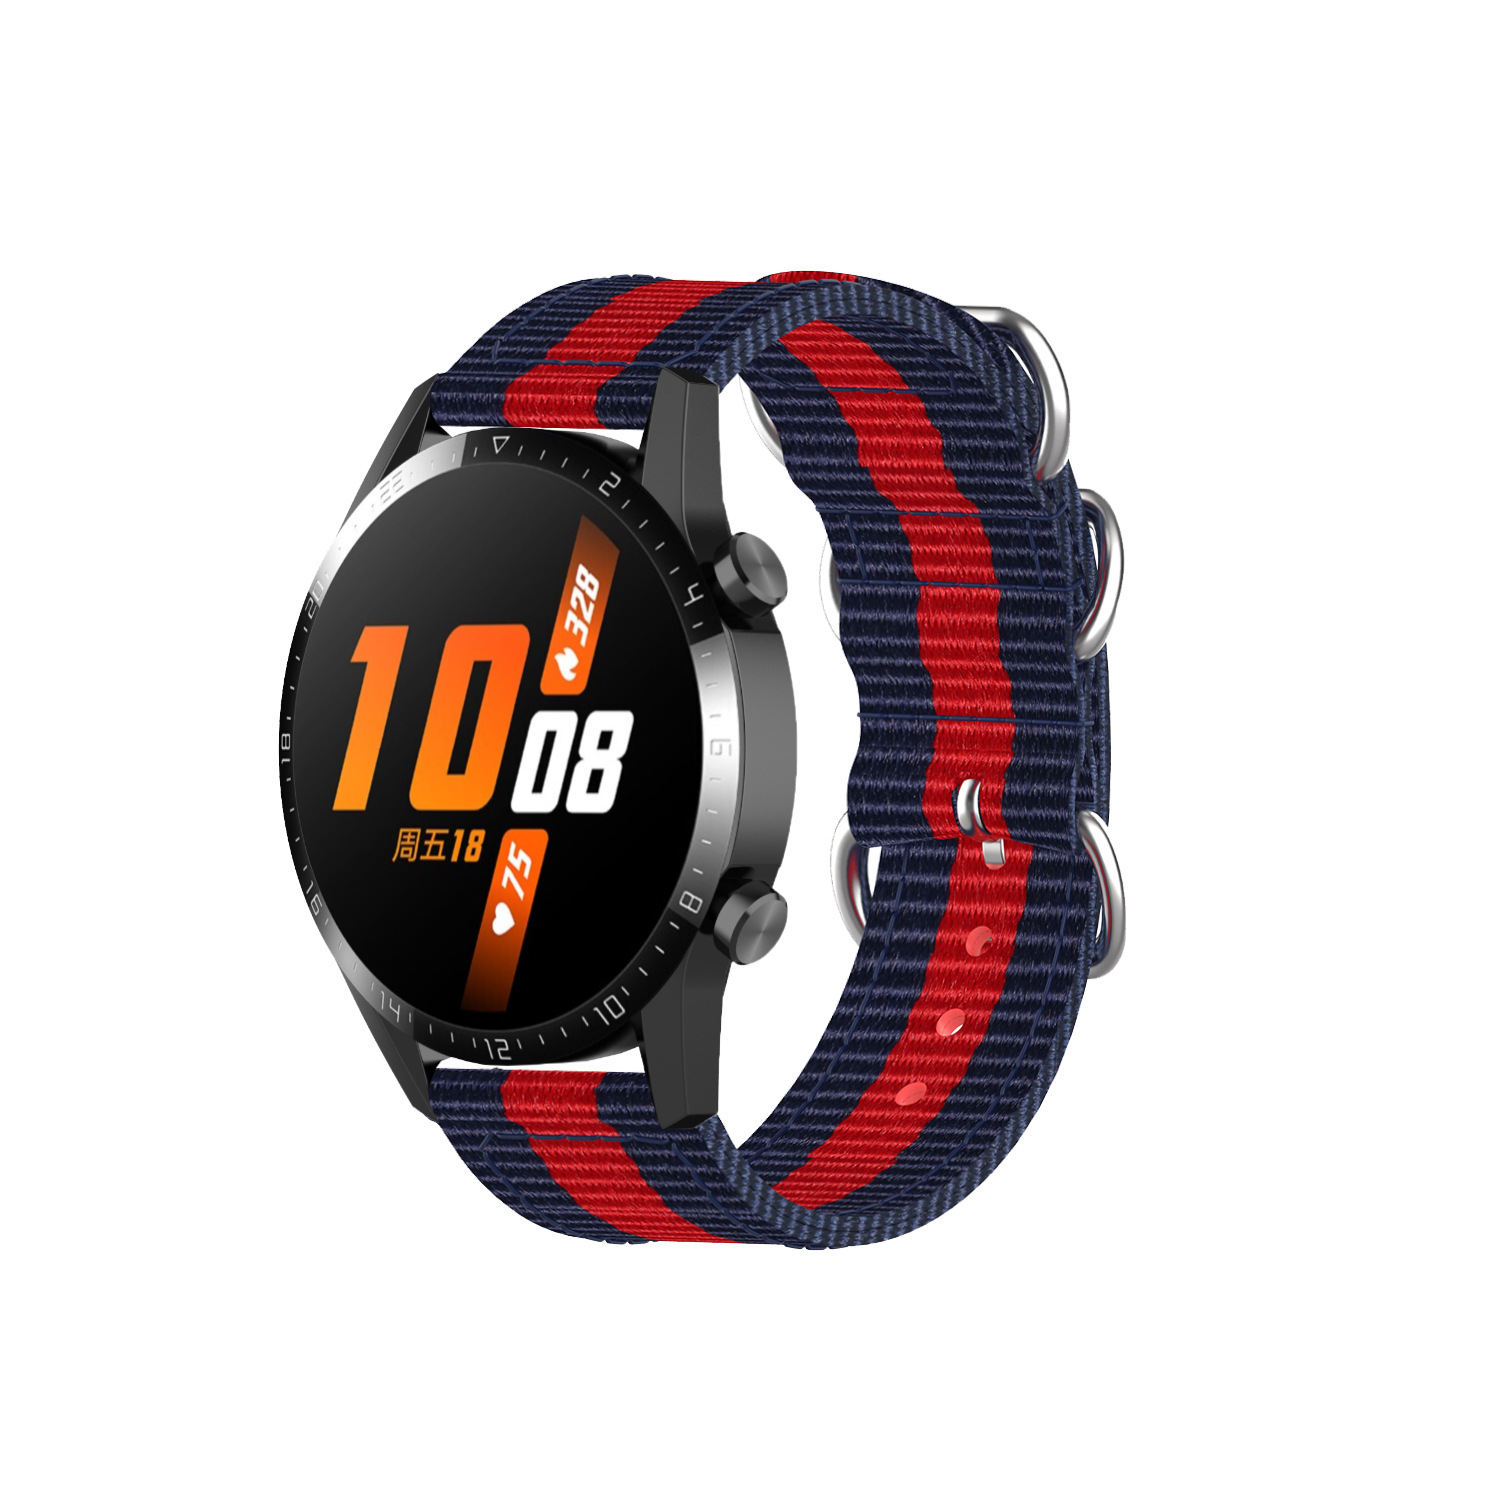 Bakeey-2022mm-Width-Breathable-Sweatproof-Nylon-Canvas-Watch-Band-Strap-Replacement-for-Huawei-Watch-1926643-12